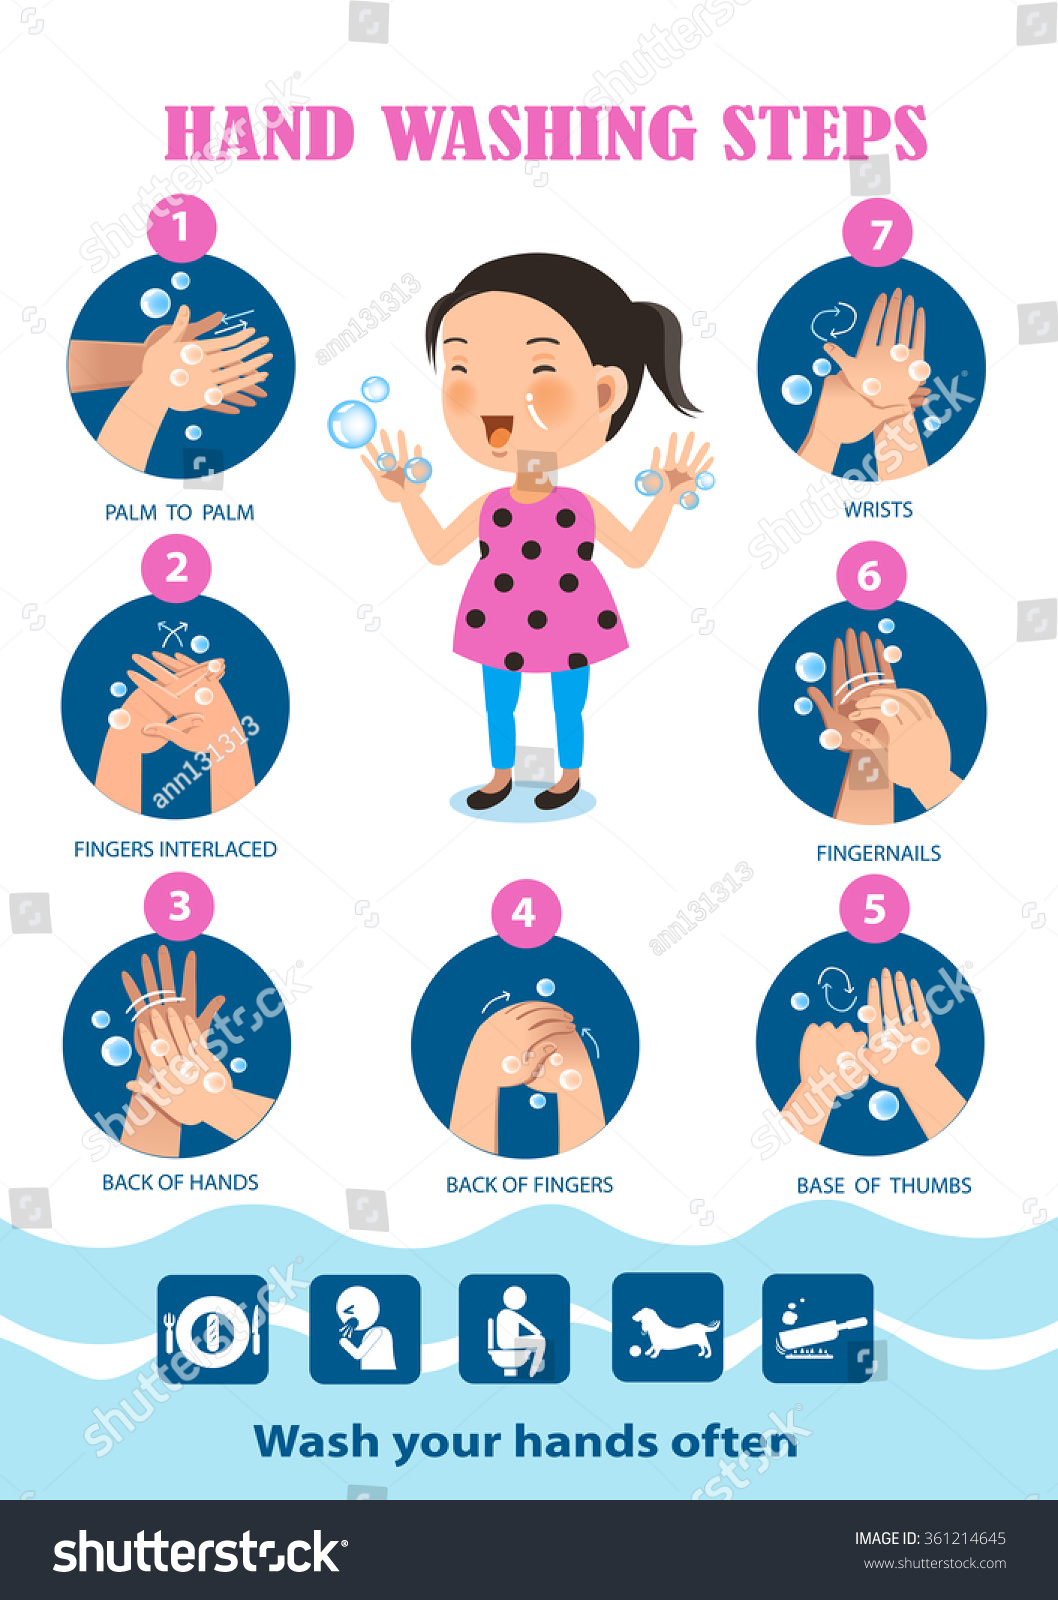 How To Wash Your Hands Step Info Graphic Vector Illustration ...